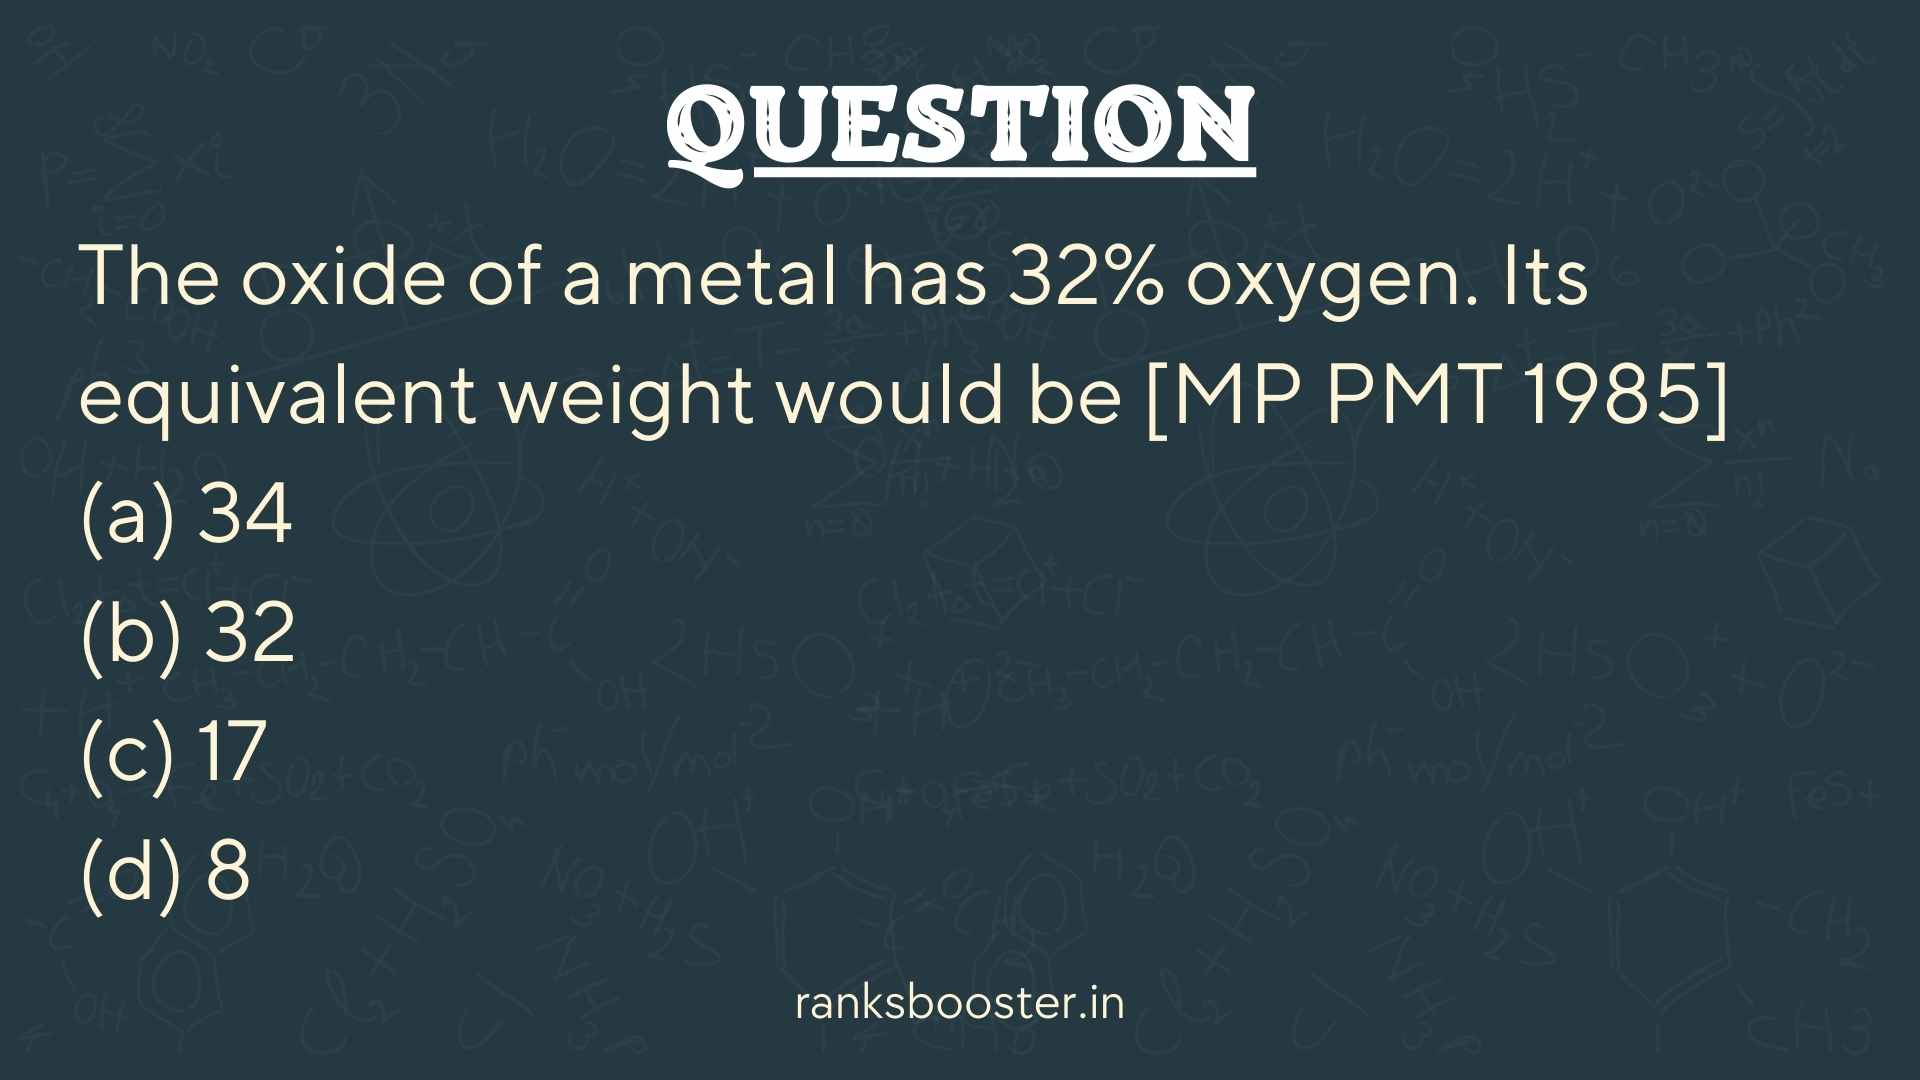 Question: The oxide of a metal has 32% oxygen. Its equivalent weight would be [MP PMT 1985] (a) 34 (b) 32 (c) 17 (d) 8